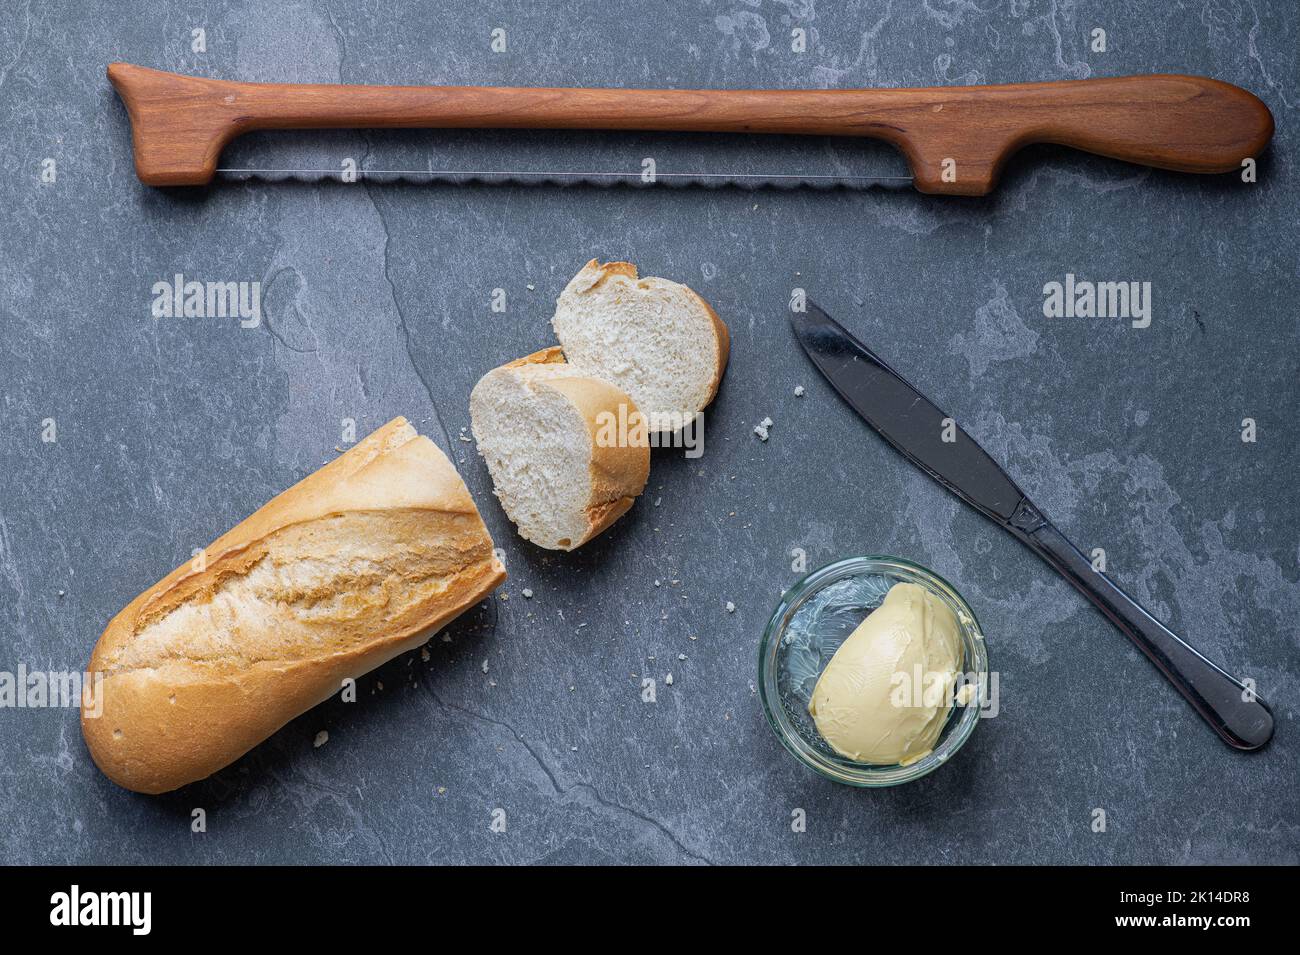 Baguette on a kitchen worktop counter topwith a fiddle bow knife. Stock Photo